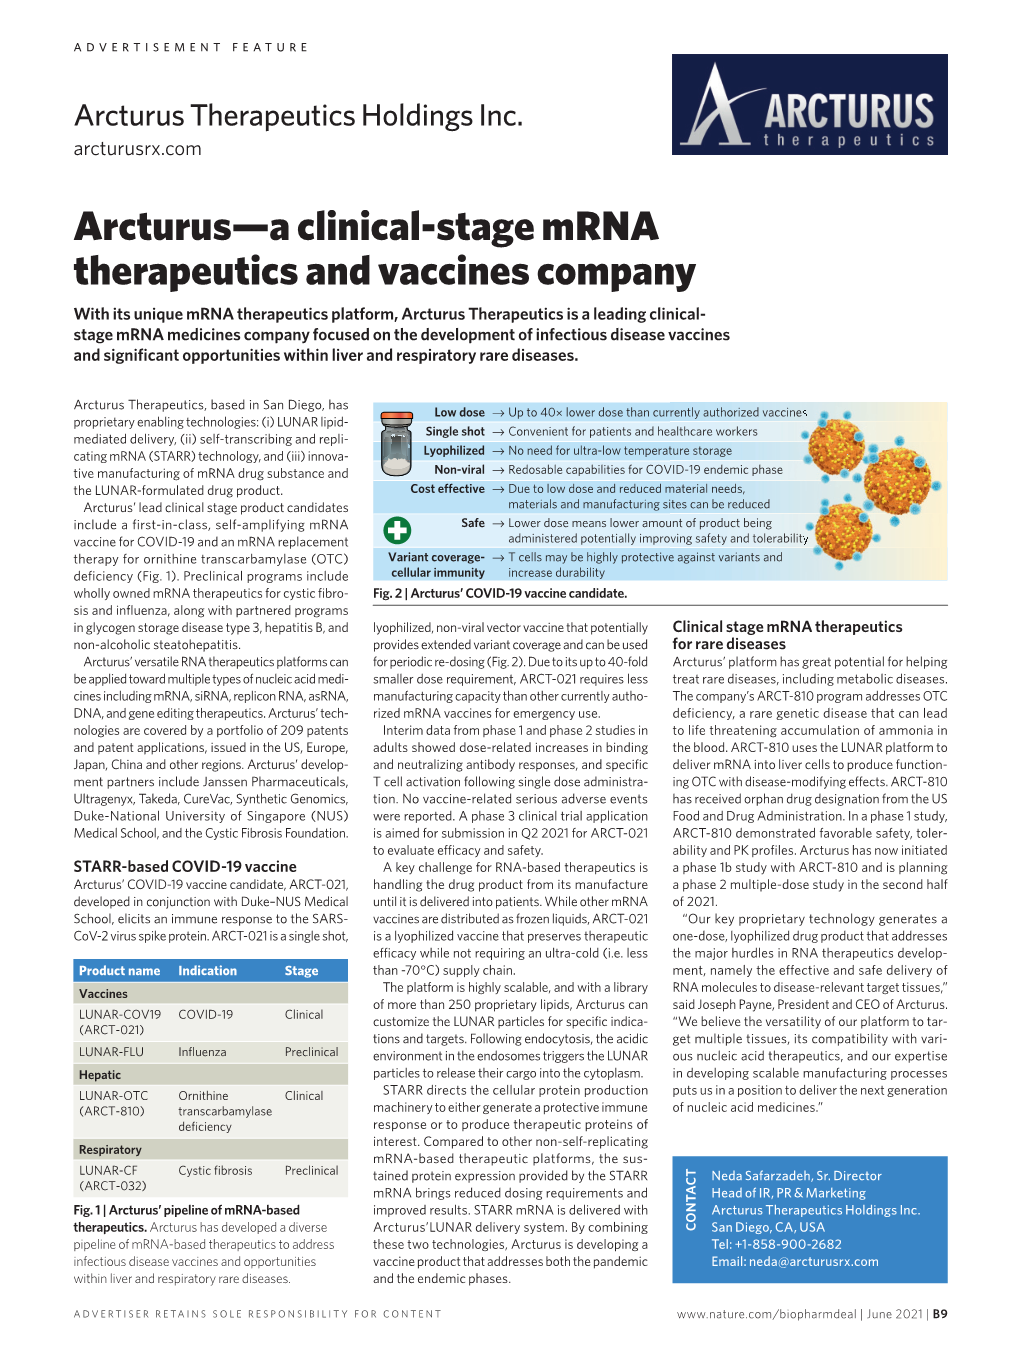 Arcturus—A Clinical-Stage Mrna Therapeutics and Vaccines Company